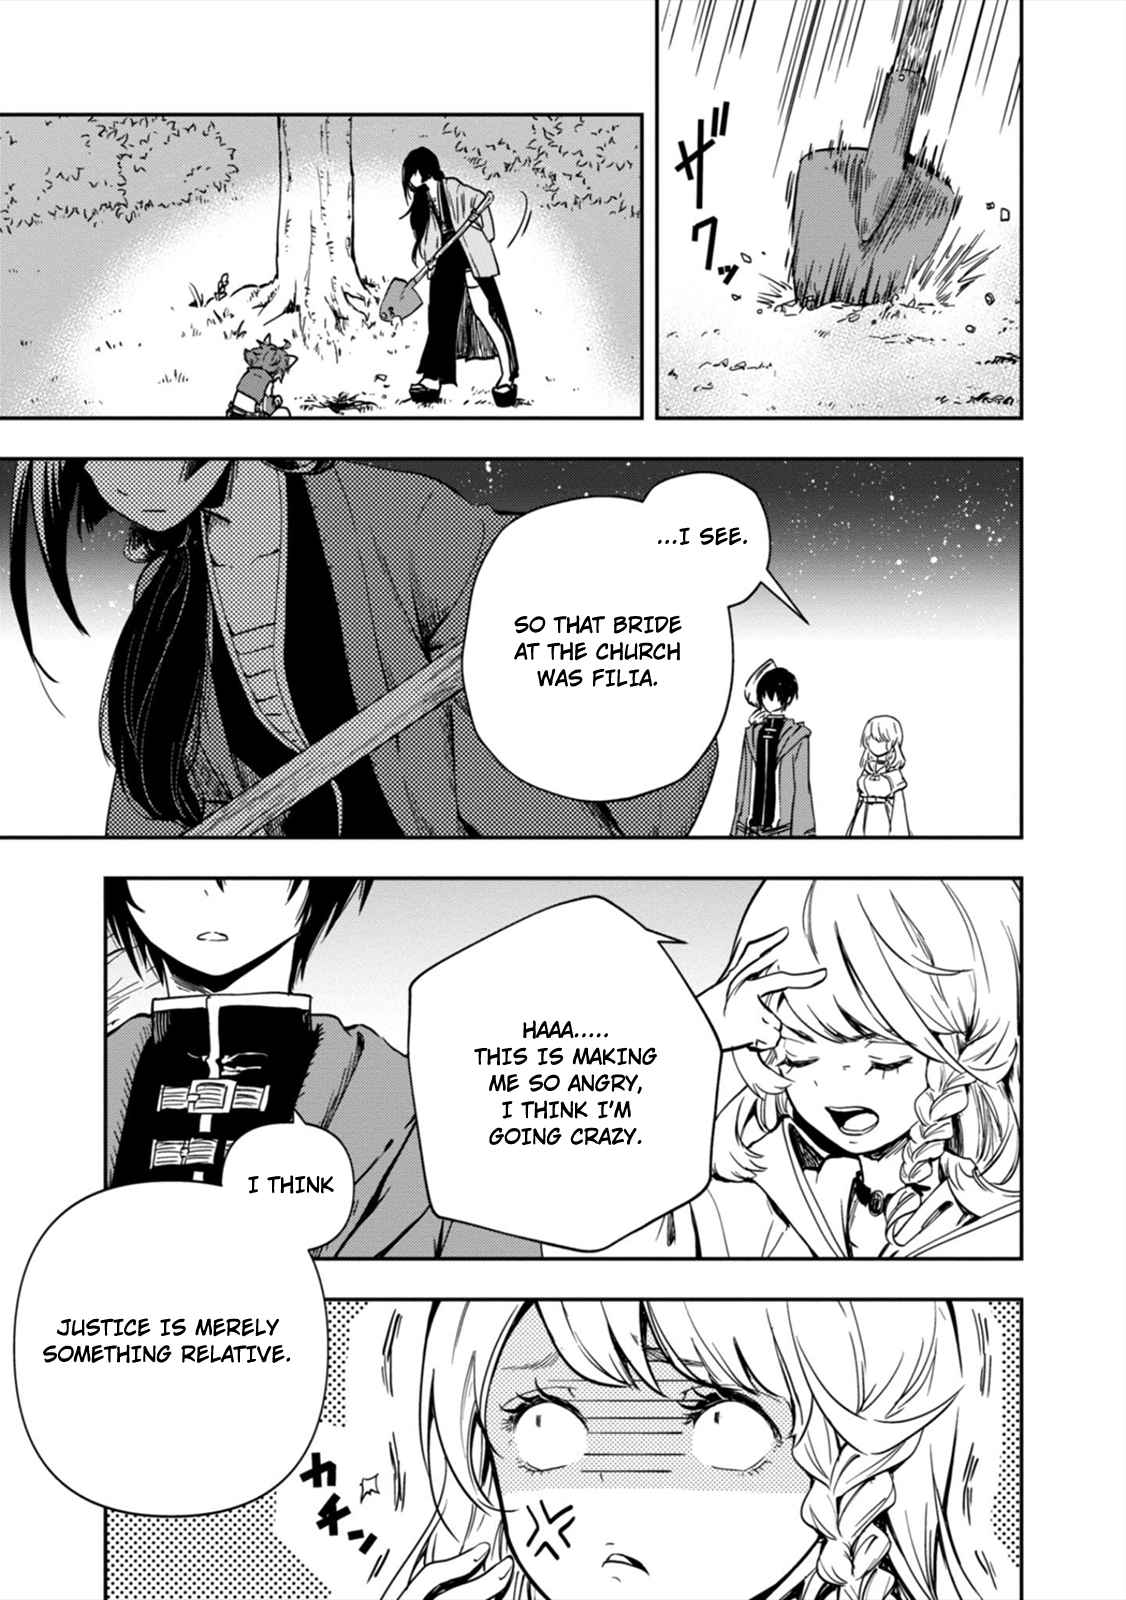 Is It Odd That I Became An Adventurer Even If I Graduated The Witchcraft Institute? Vol. 1 Ch. 3